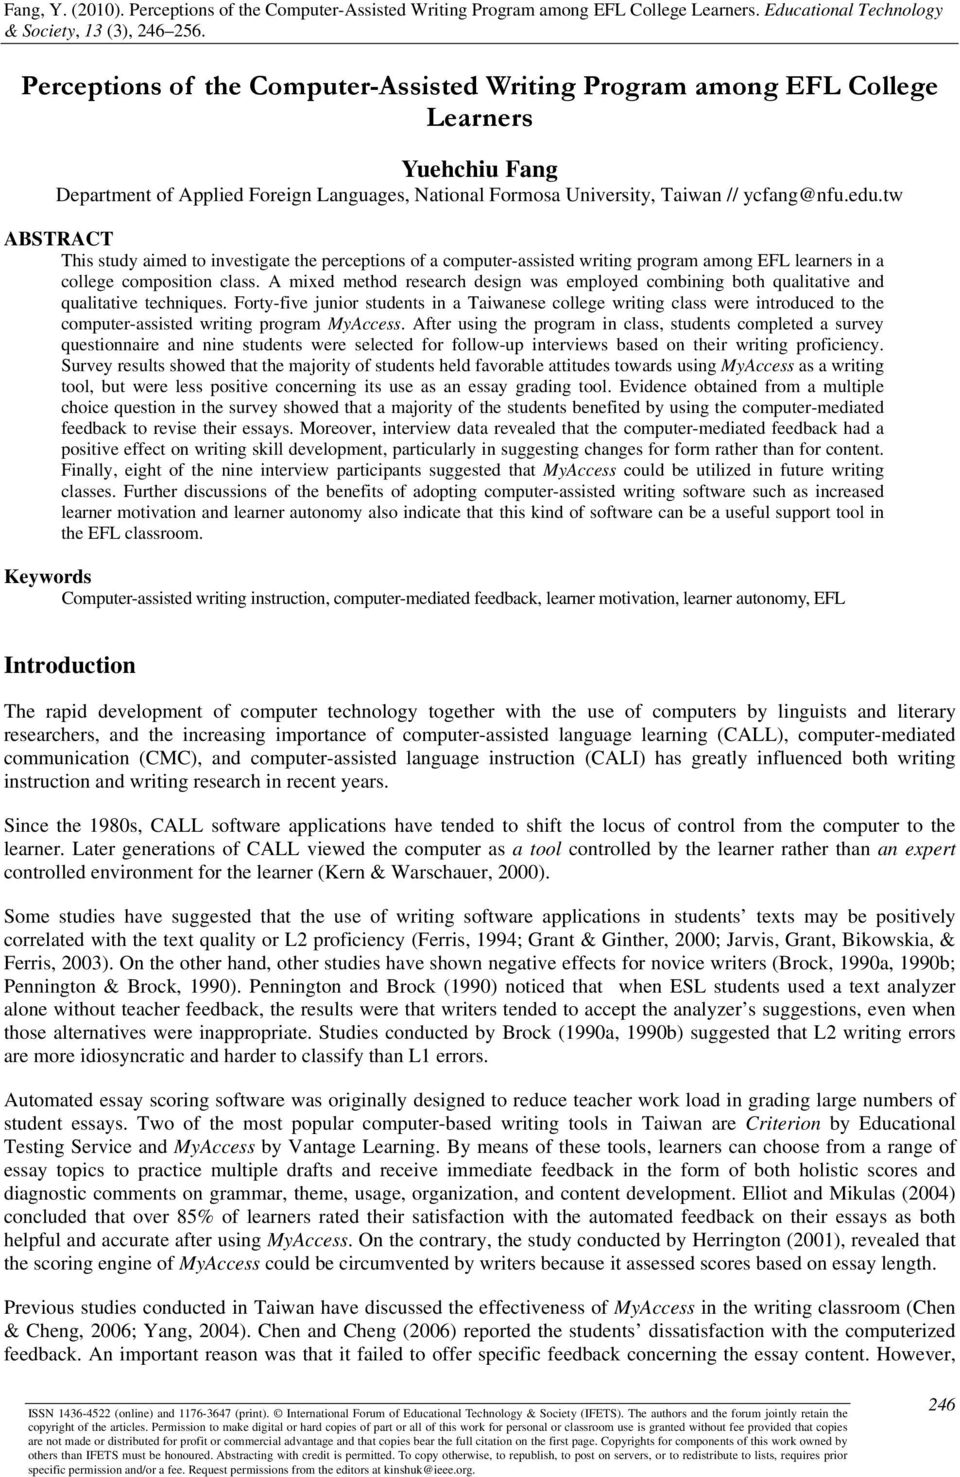 tw ABSTRACT This study aimed to investigate the perceptions of a computer-assisted writing program among EFL learners in a college composition class.